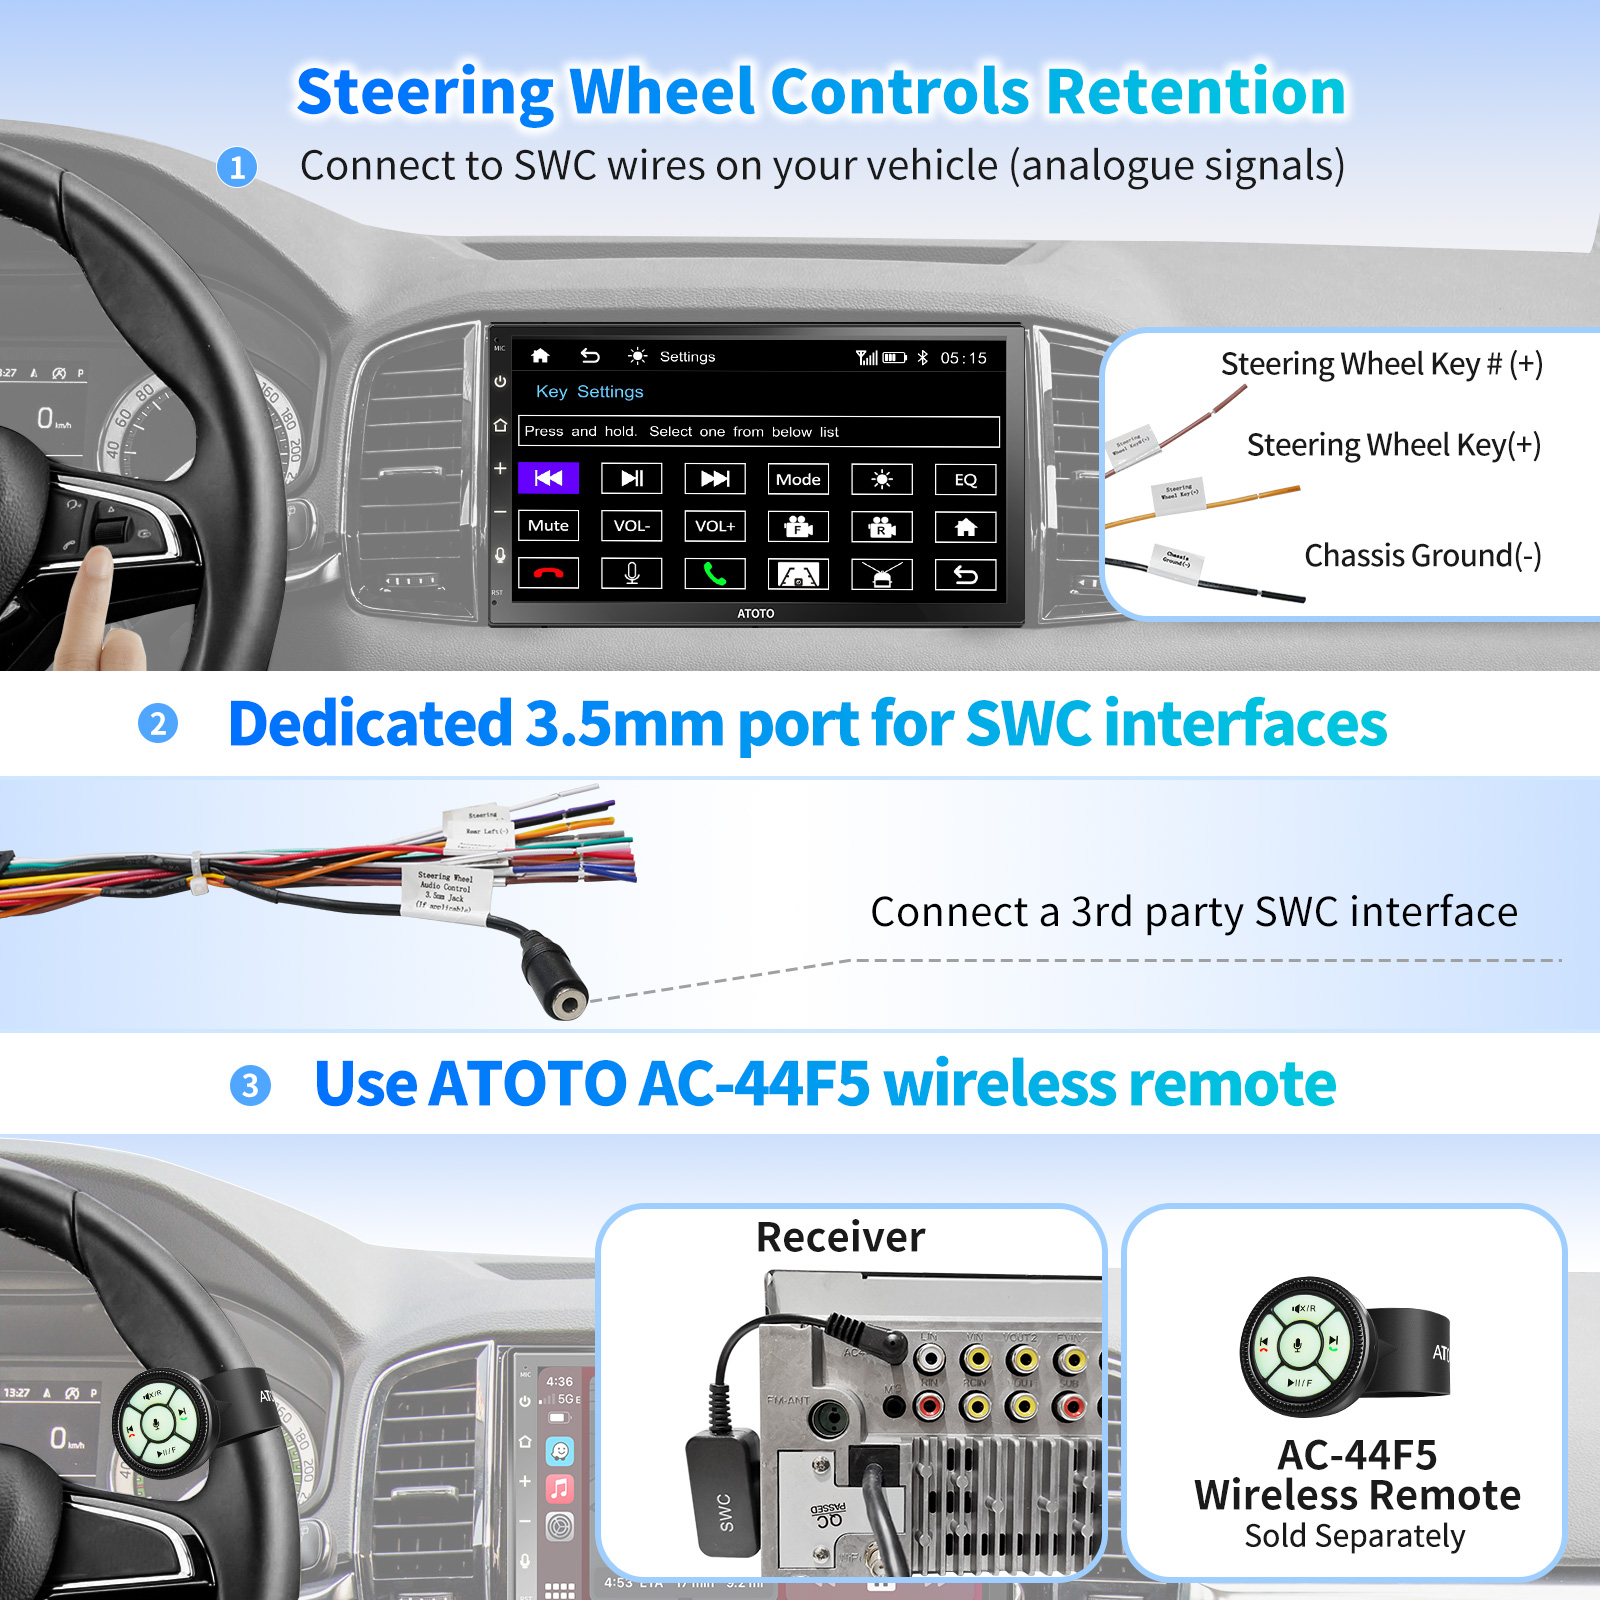 ATOTO 7inch Full Touchscreen Car Stereo Double DIN, Wireless 